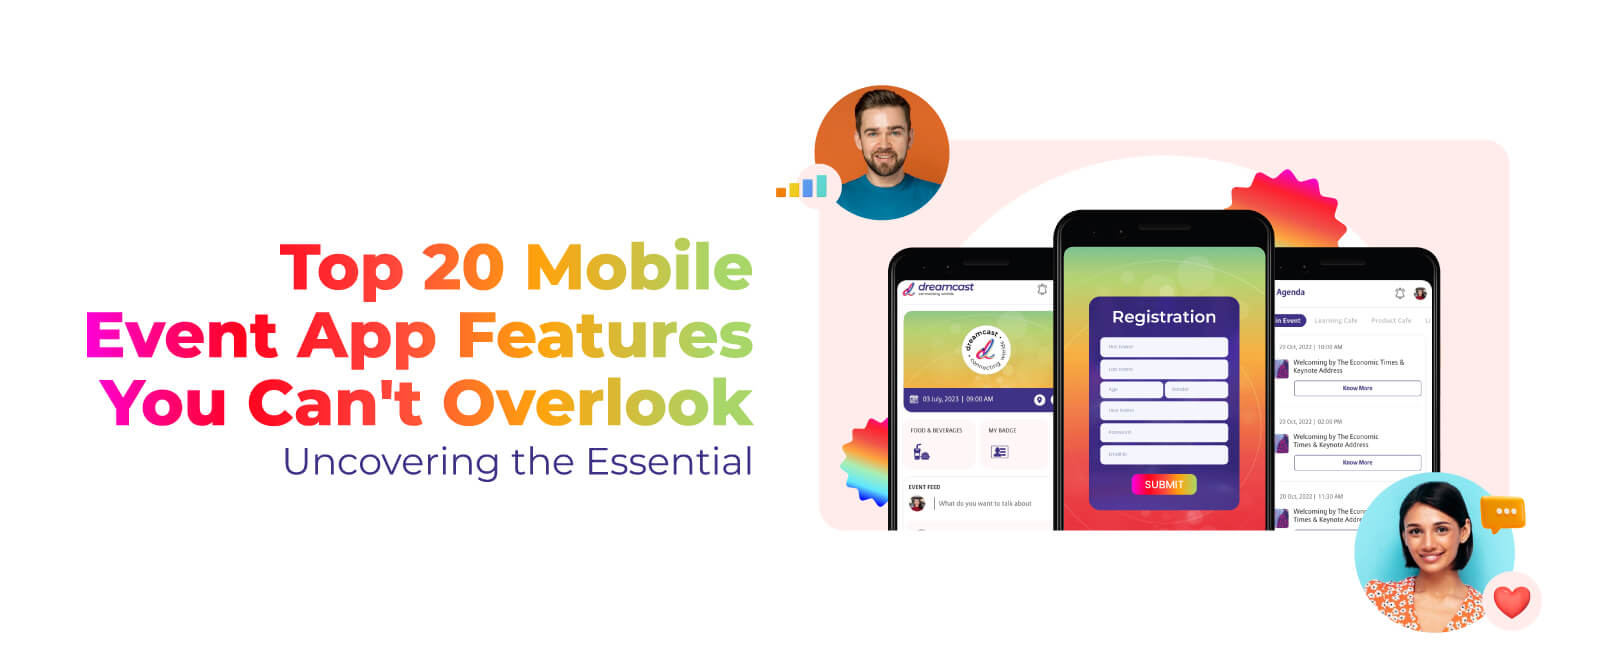 Top 20 Mobile Event App Features You Can’t Overlook: Uncovering the Essential